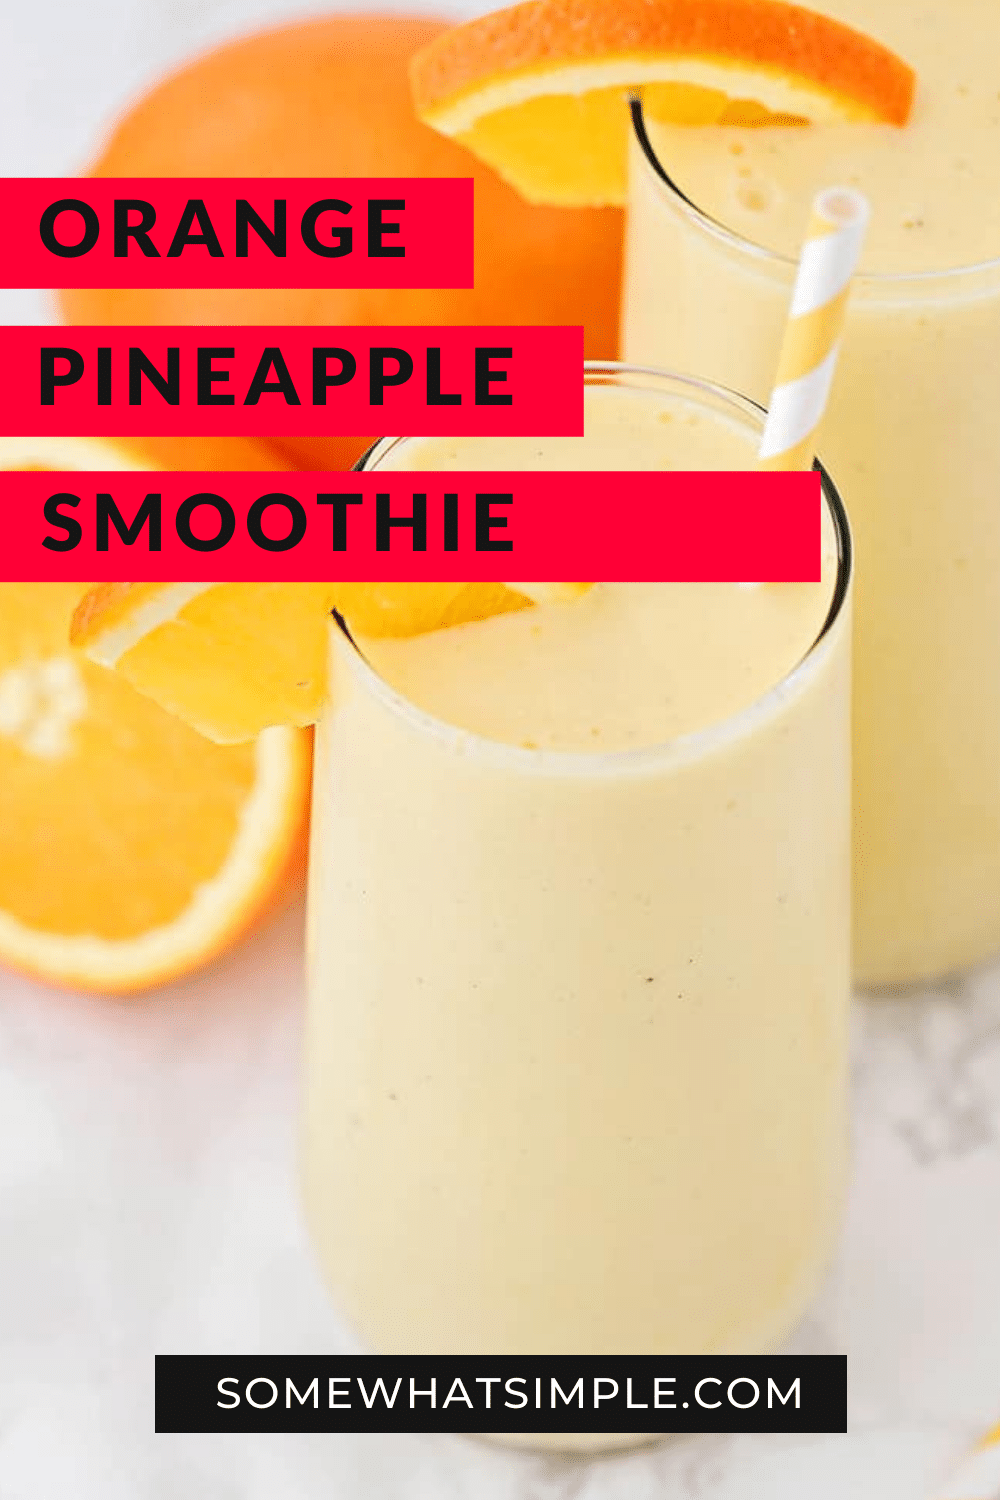 This sweet and refreshing orange creamsicle smoothie is perfect for an easy breakfast or afternoon snack! Filled with pineapple and yogurt, it's a healthy and flavorful way to enjoy your favorite frozen creamsicle drink! via @somewhatsimple